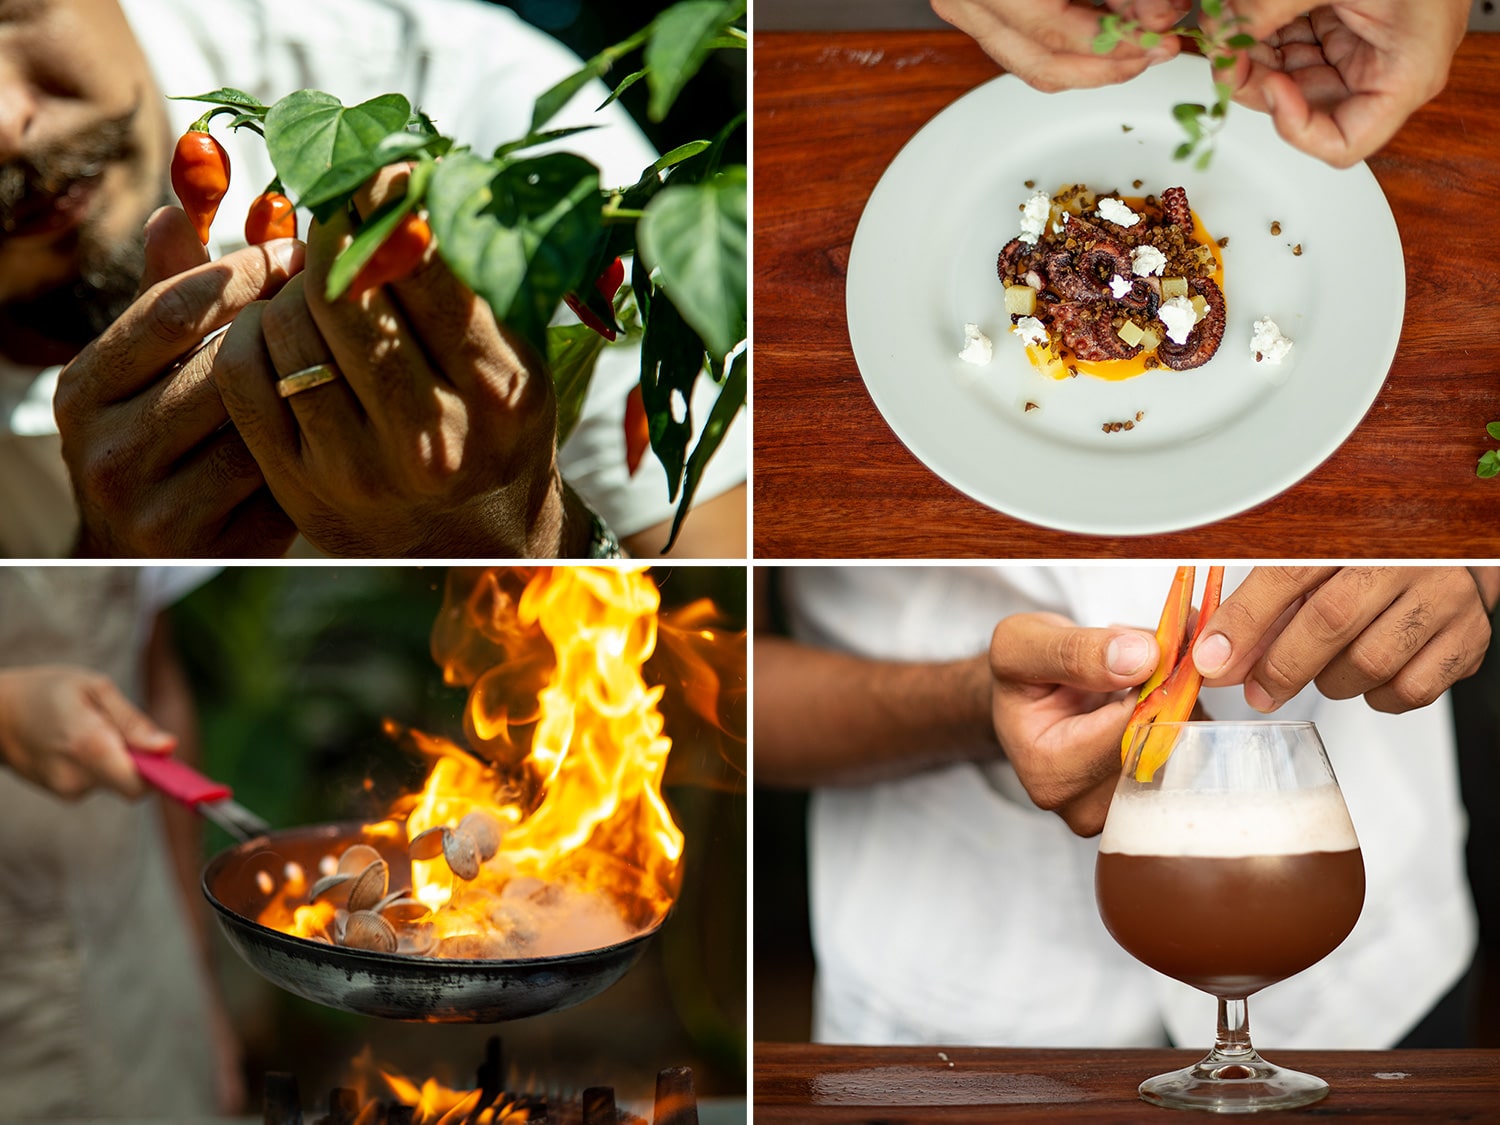 Isla Palenque's chefs create authentic, fresh Panamanian cuisine with modern twists.